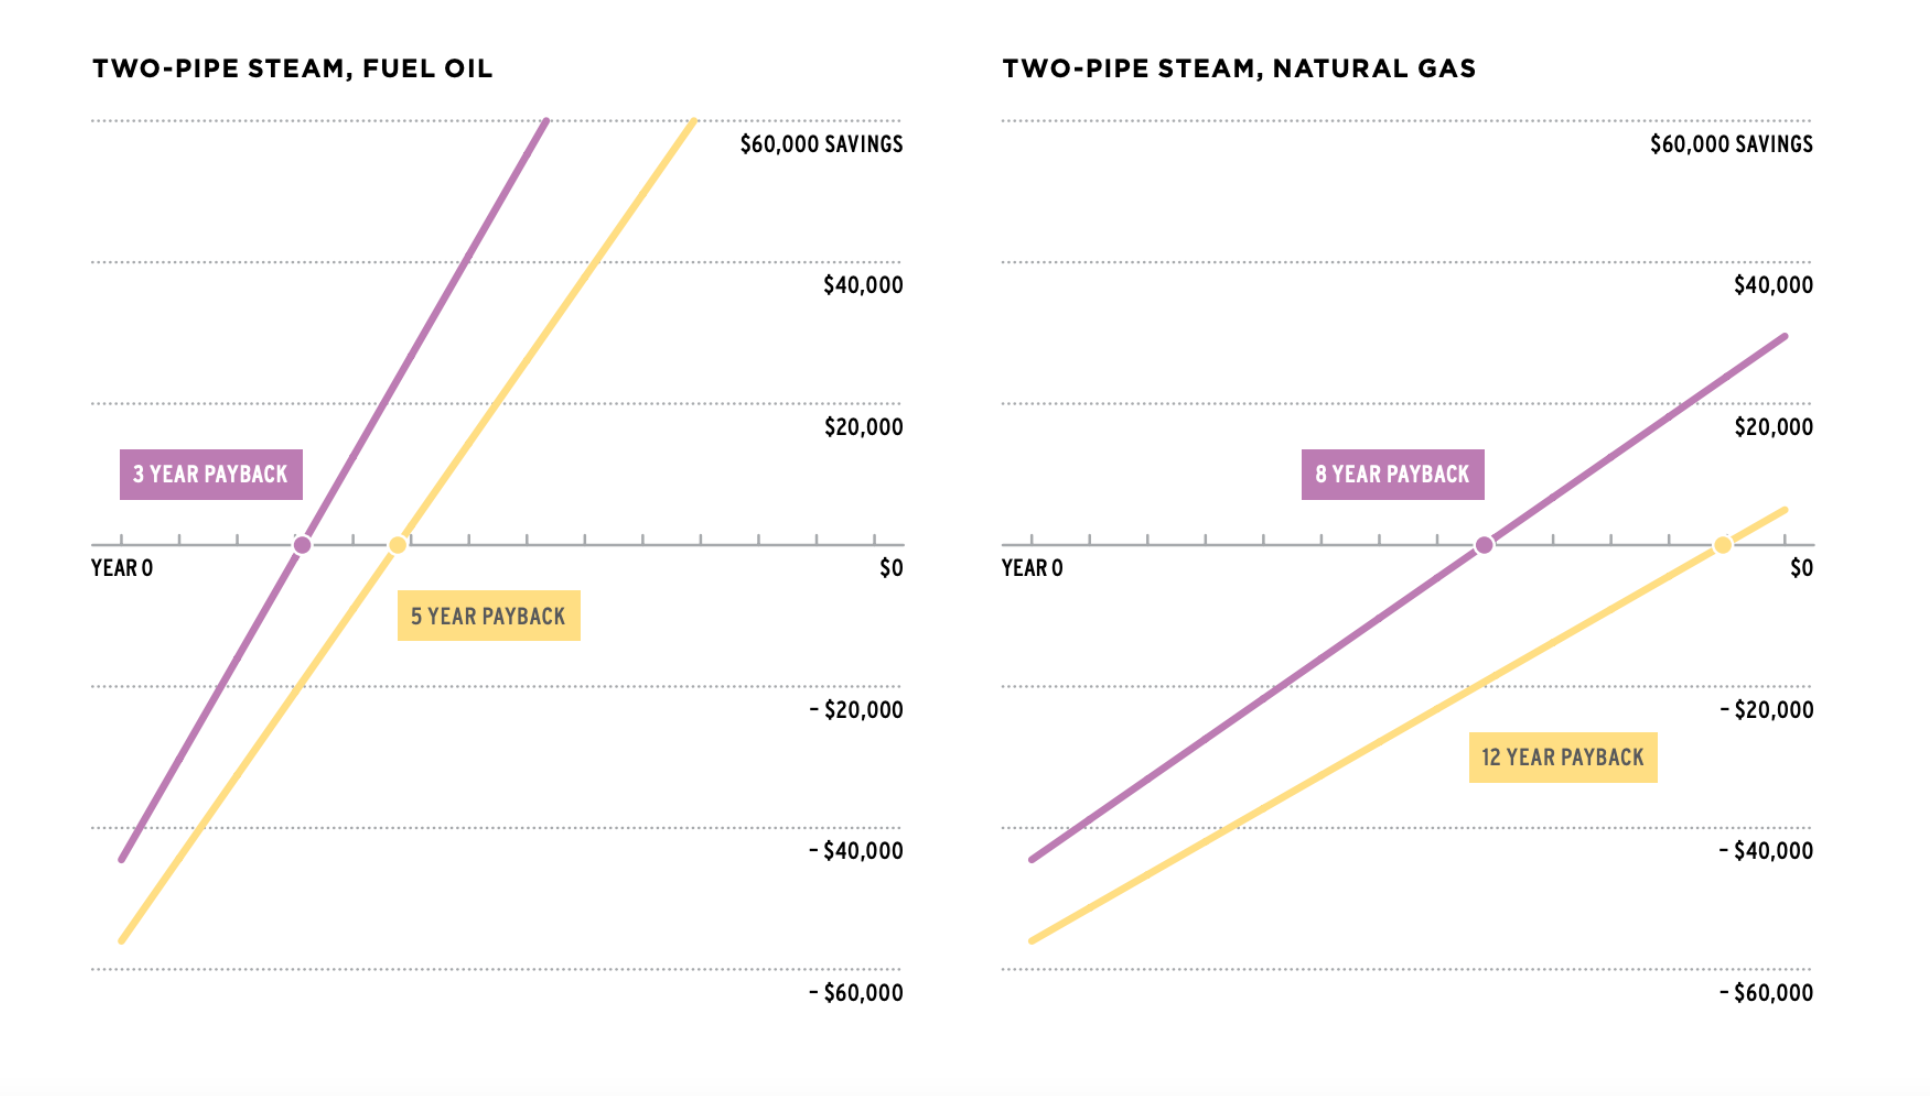 Savings in two-pipe steam using fuel oil and natural gas. 